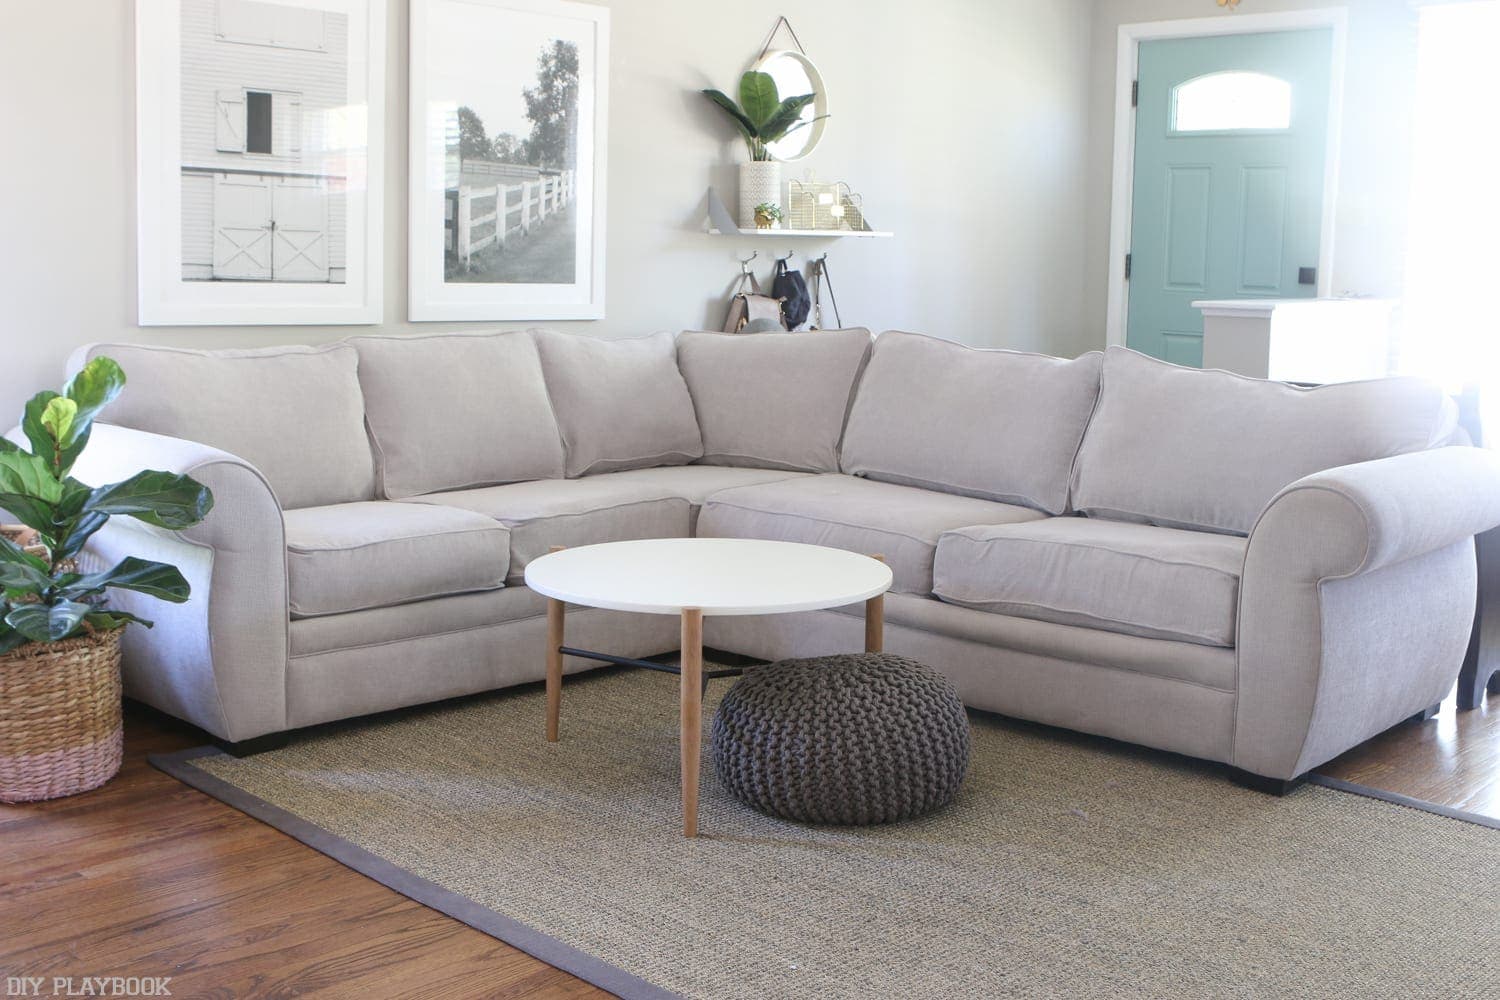 Insert the cushions back into the cases, and your couch looks like new again!